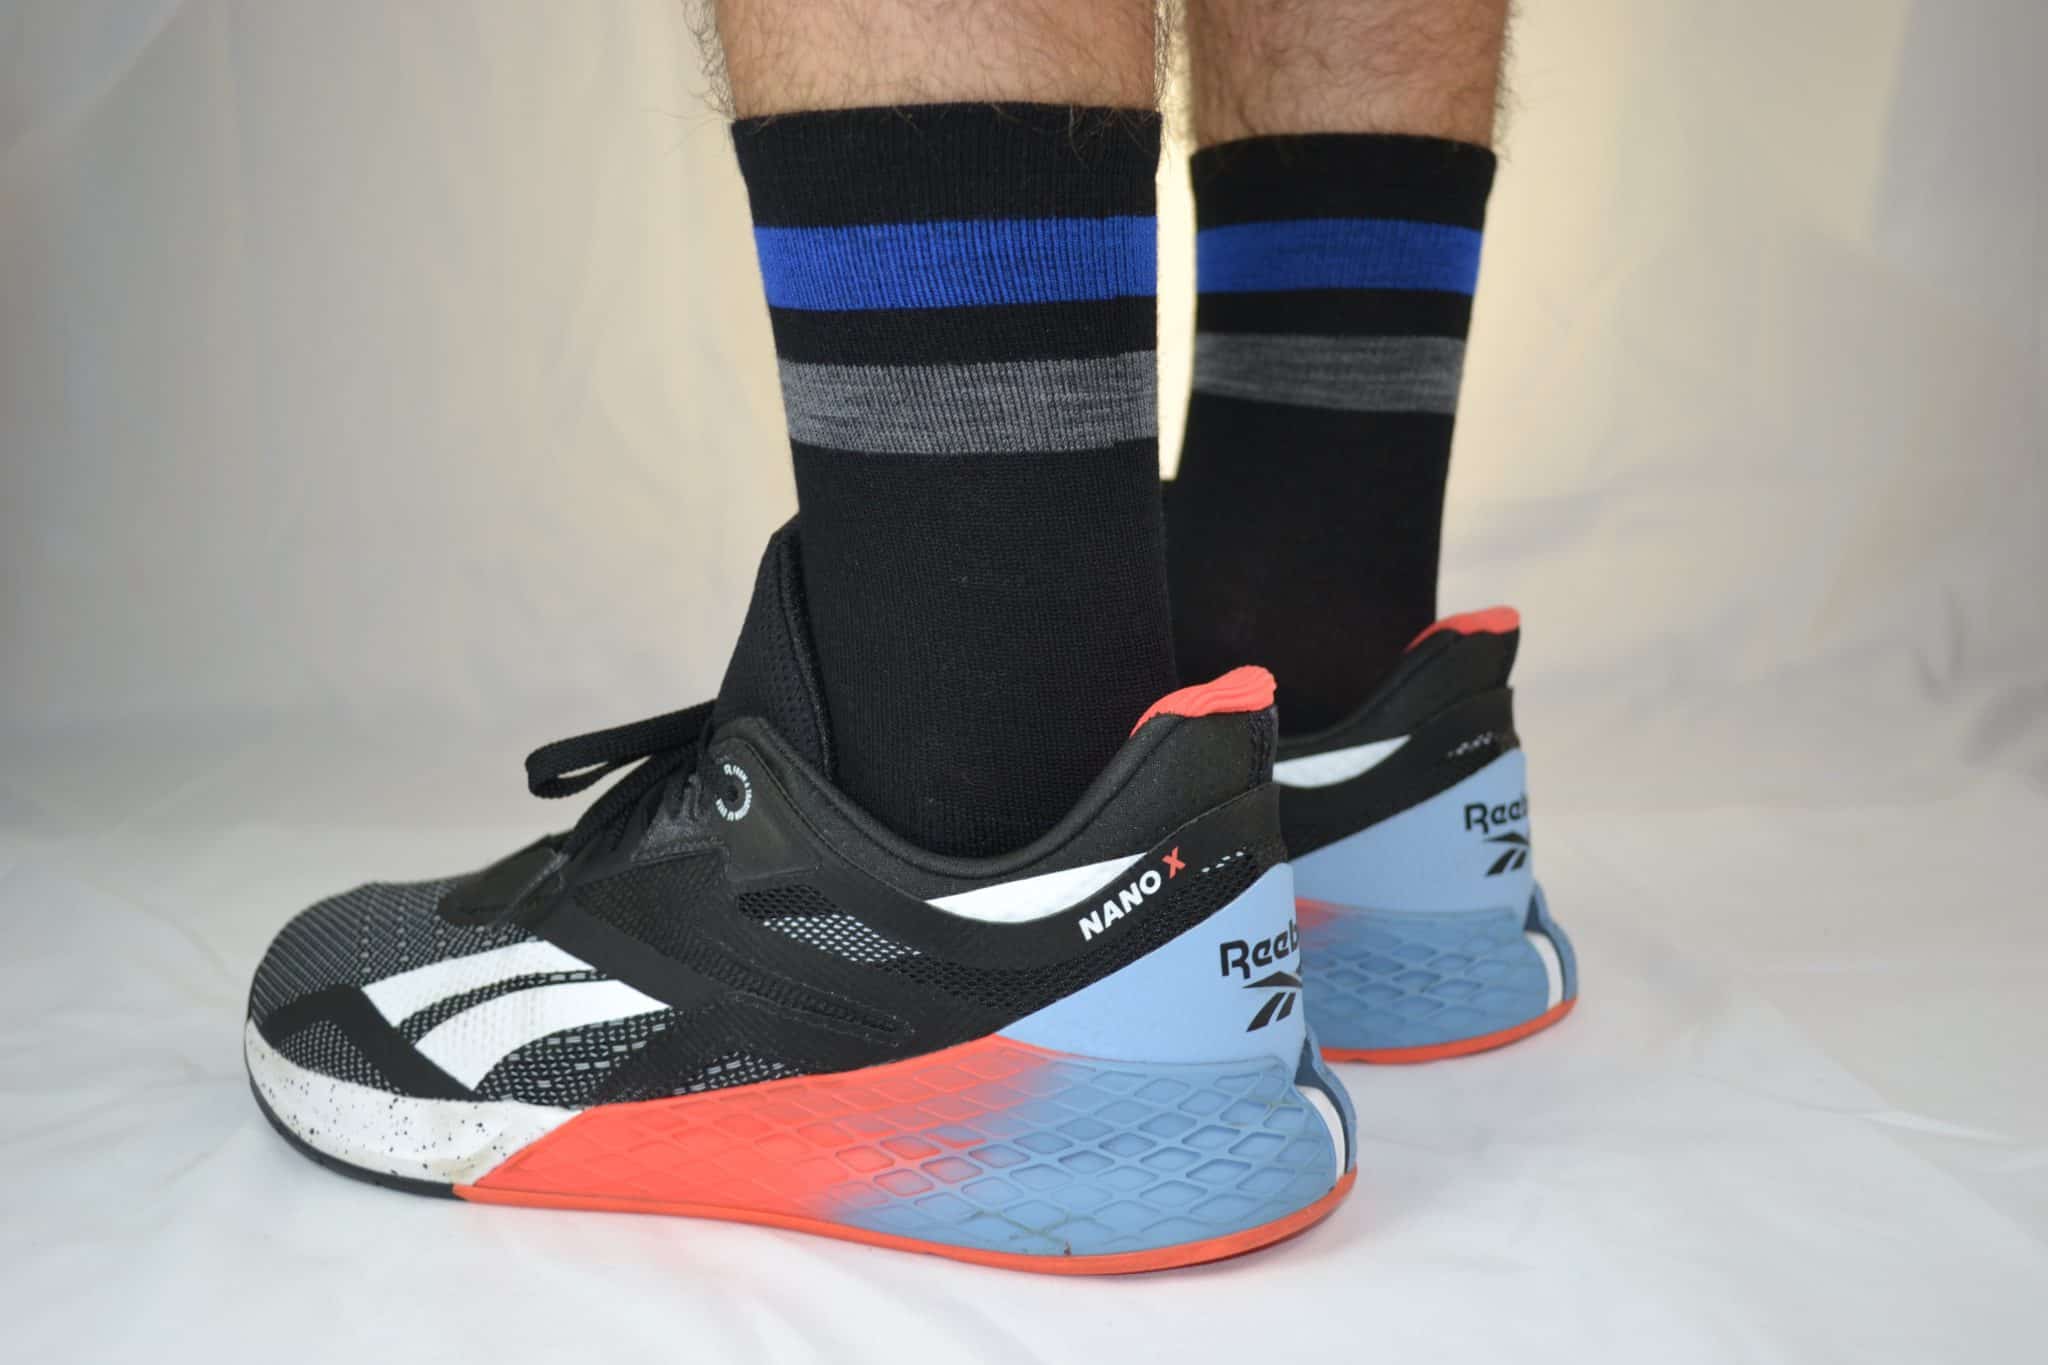 Reebok Nano X - CrossFit Training Shoe Review - Fit at Midlife